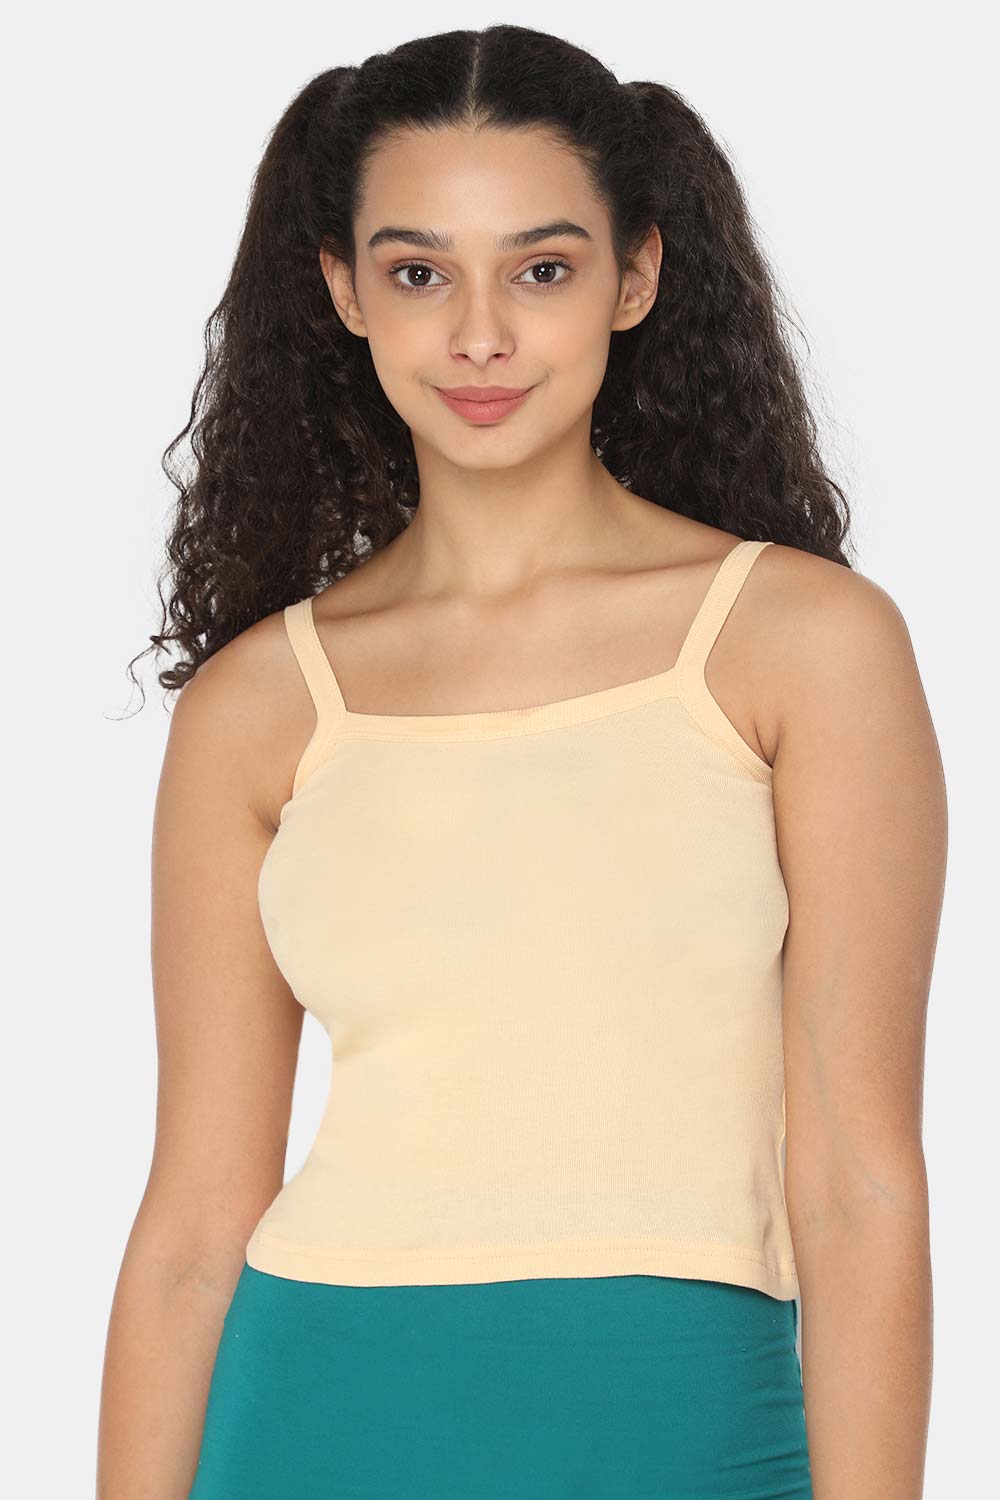 Intimacy Camisole-Slip Special Combo Pack - In01 - Pack of 3 - C33